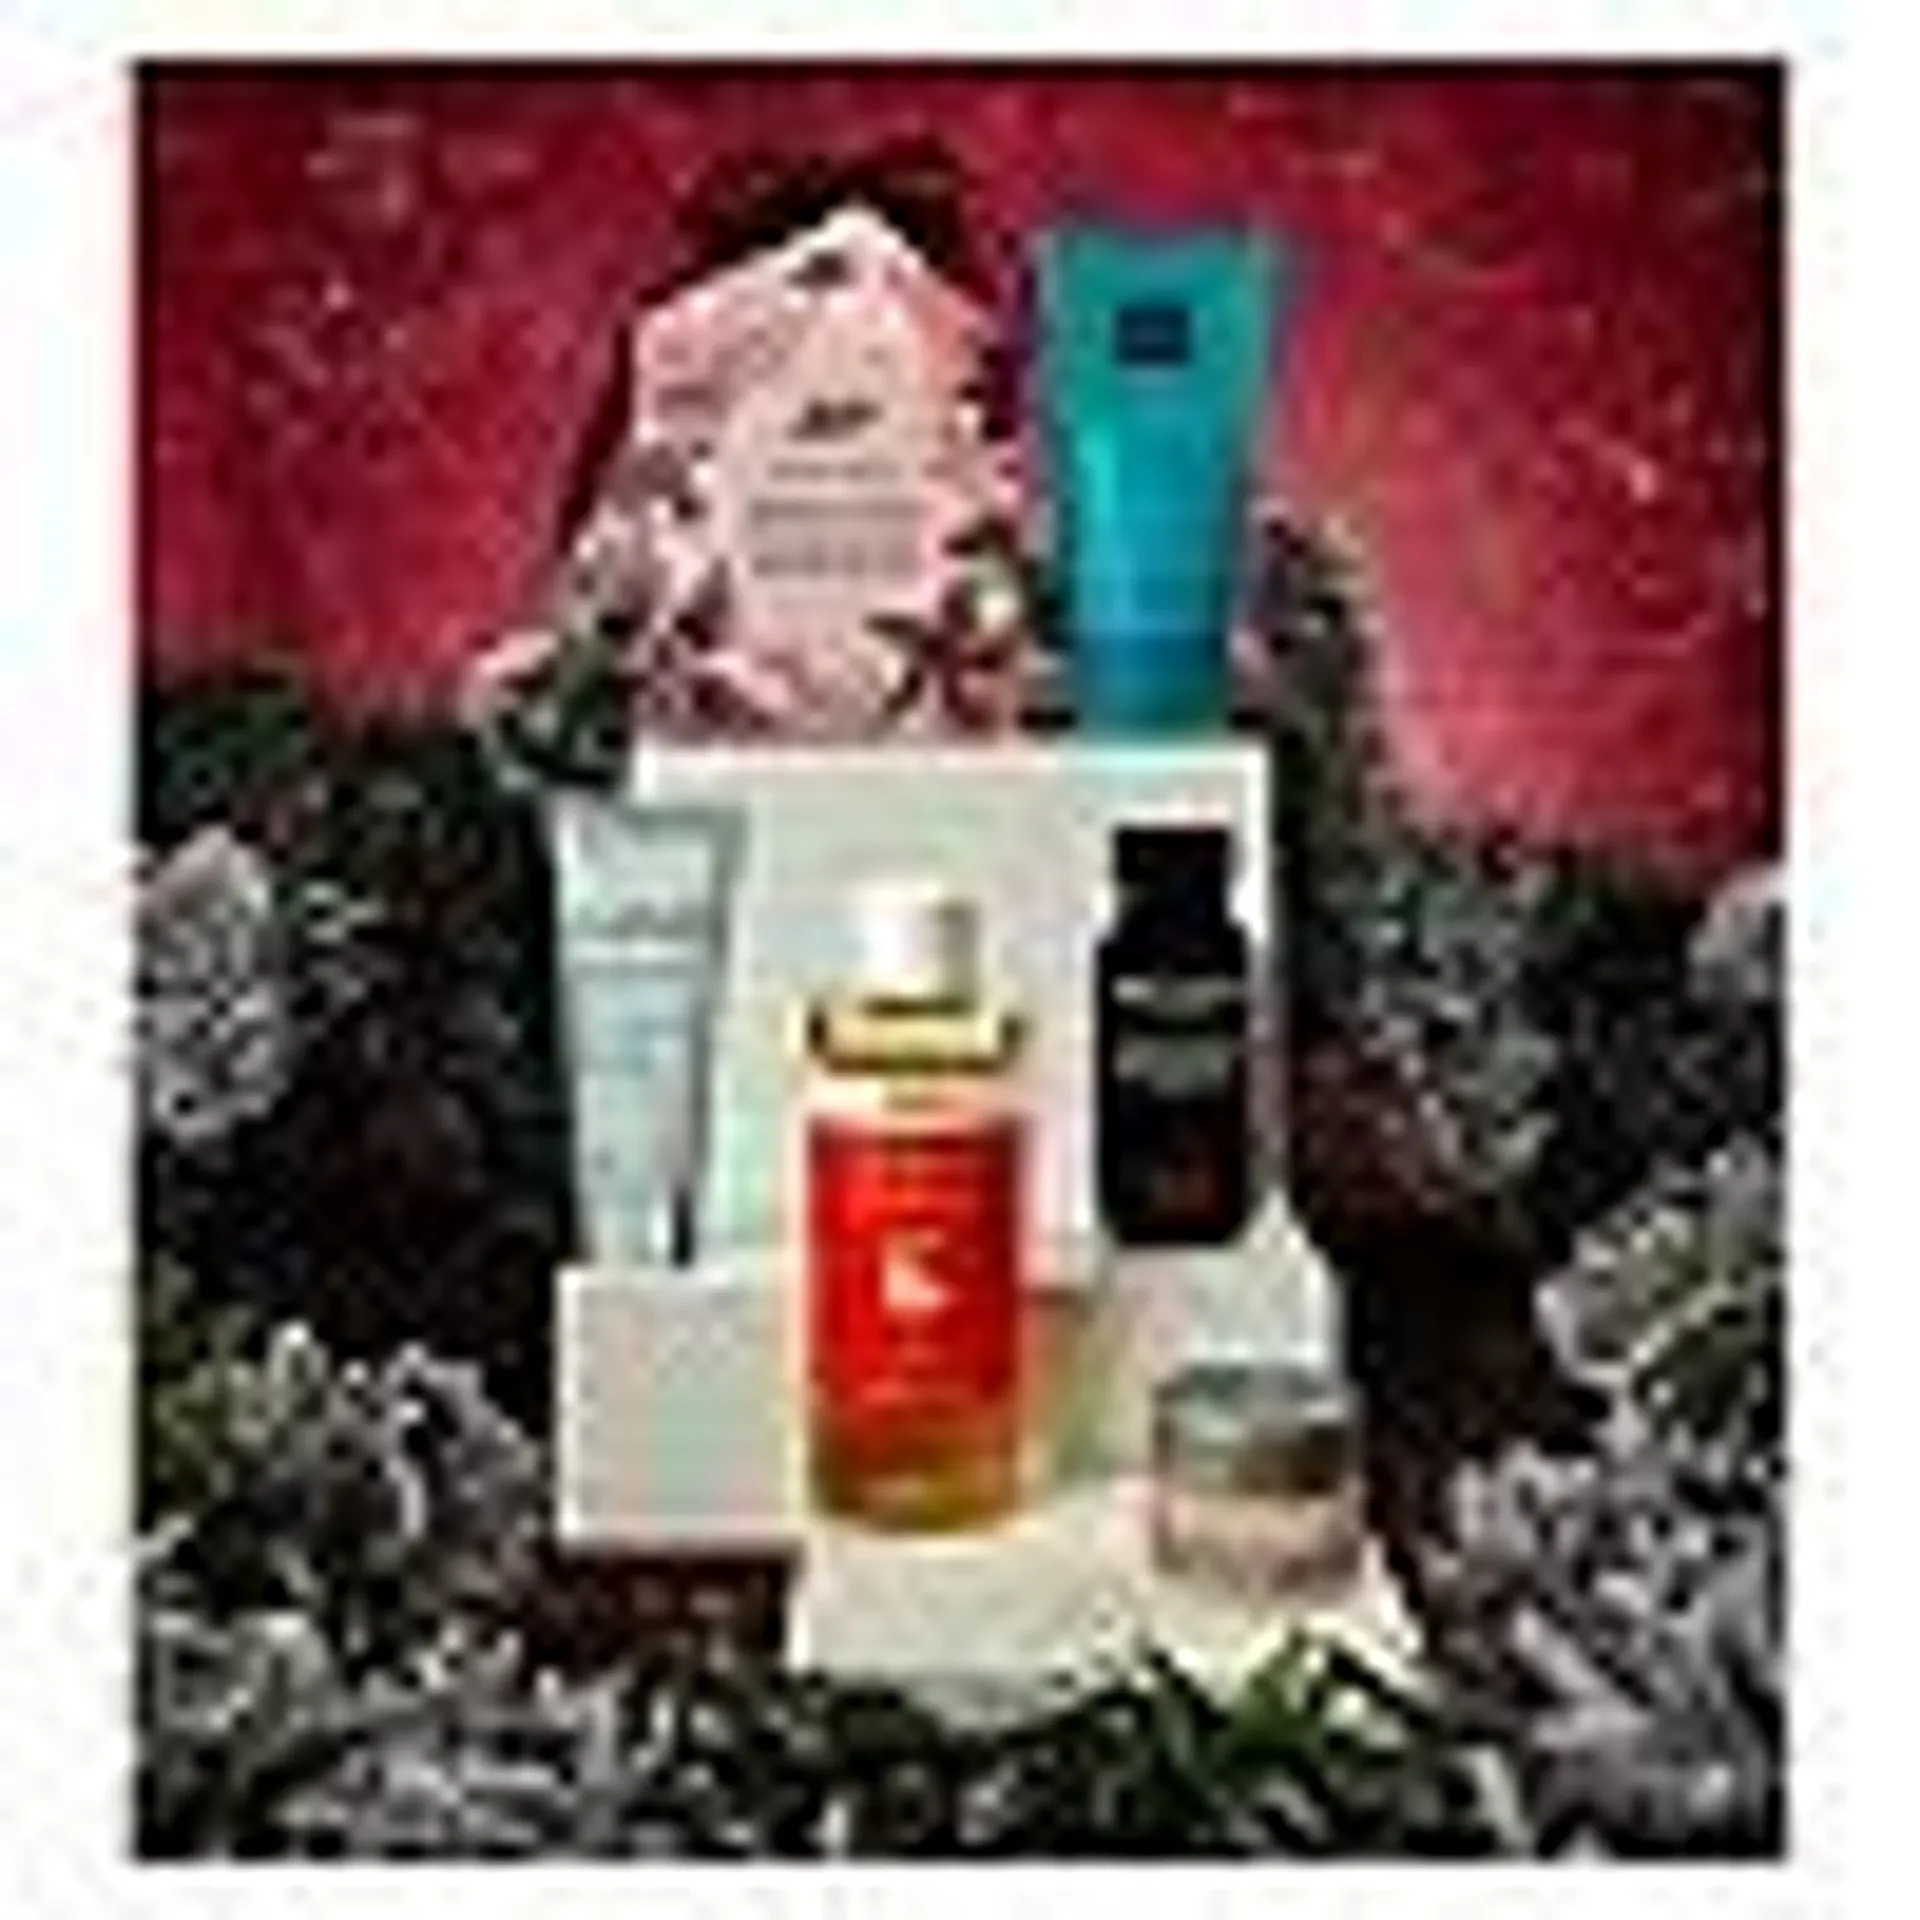 Boots Premium Beauty Christmas Bauble - Skincare Saviours - Limited Edition